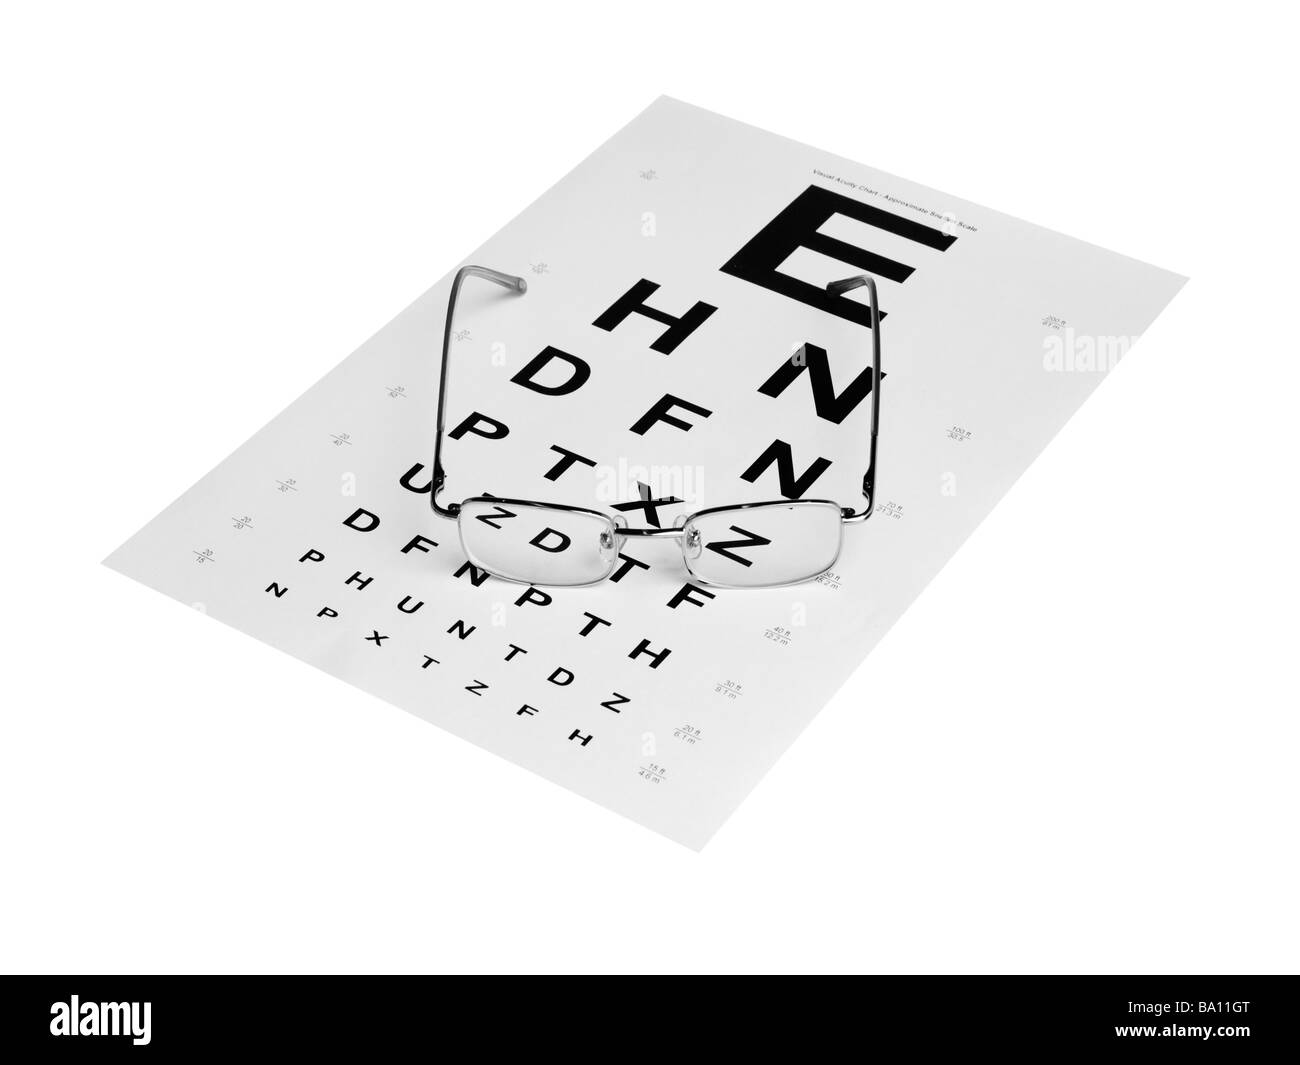 Spectacles on Snellen eye test chart Stock Photo - Alamy